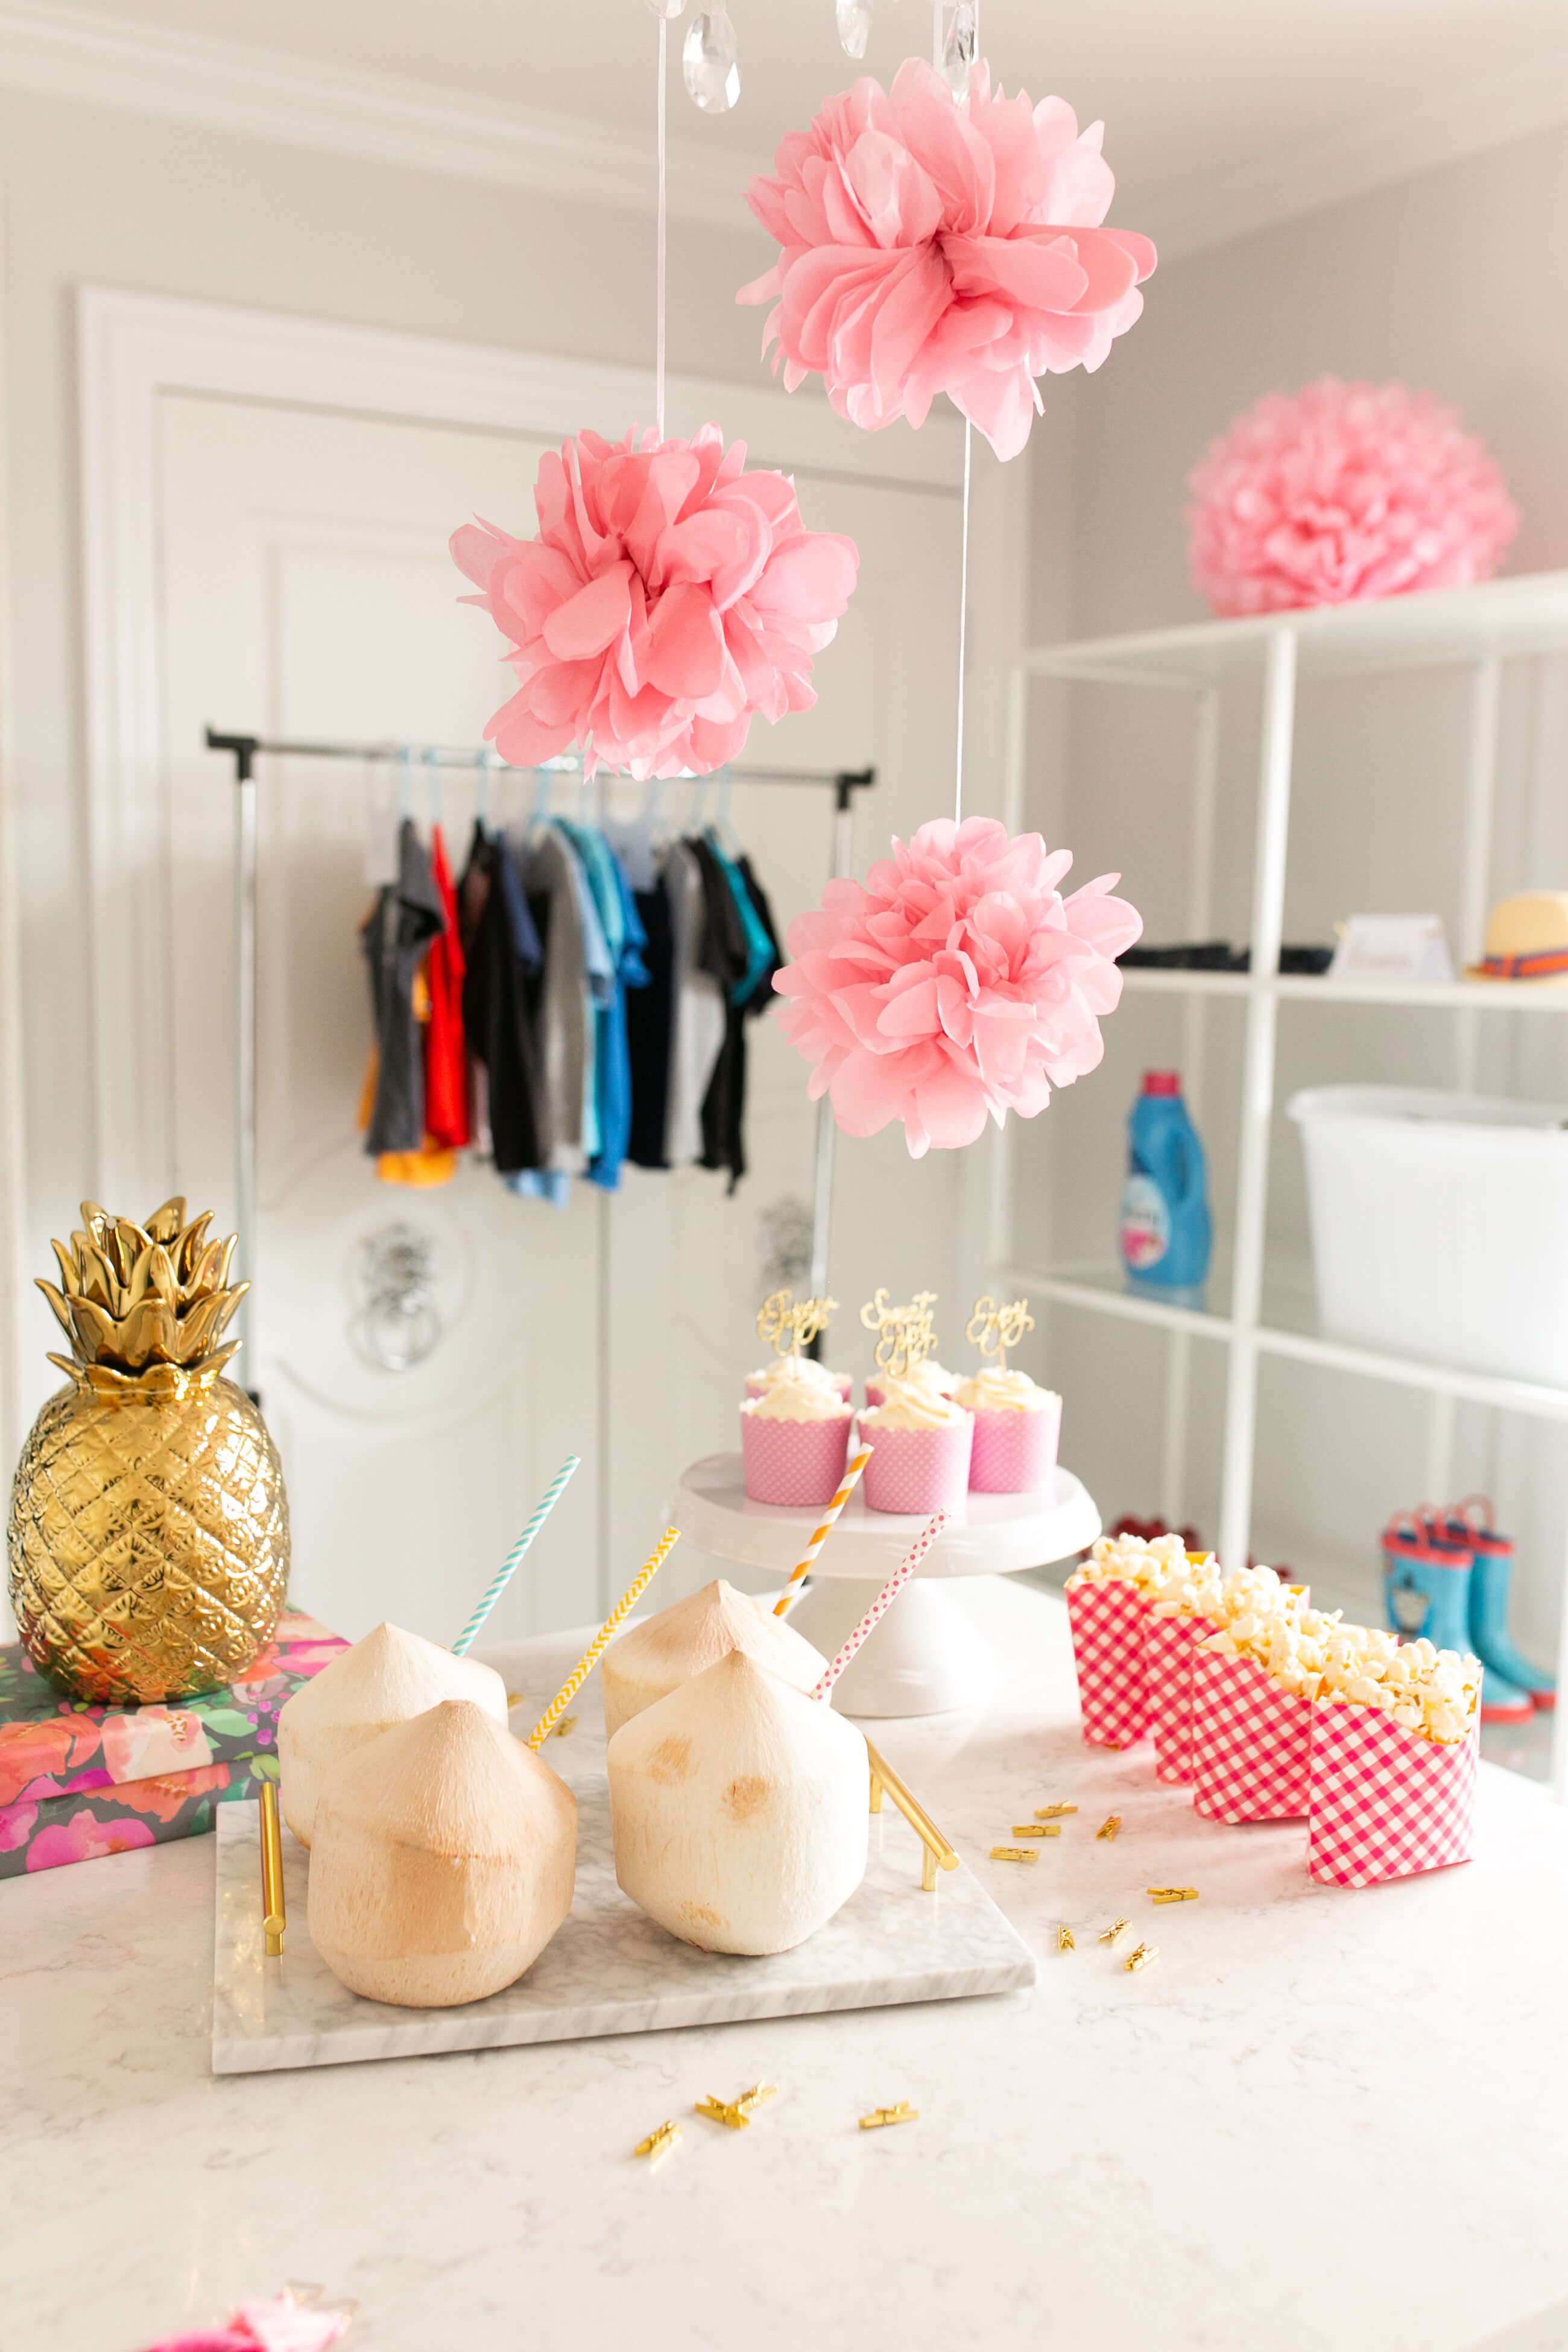 How to host a Hand-Me-Downy clothing swap party Mandy Furnis sparkleshinylove